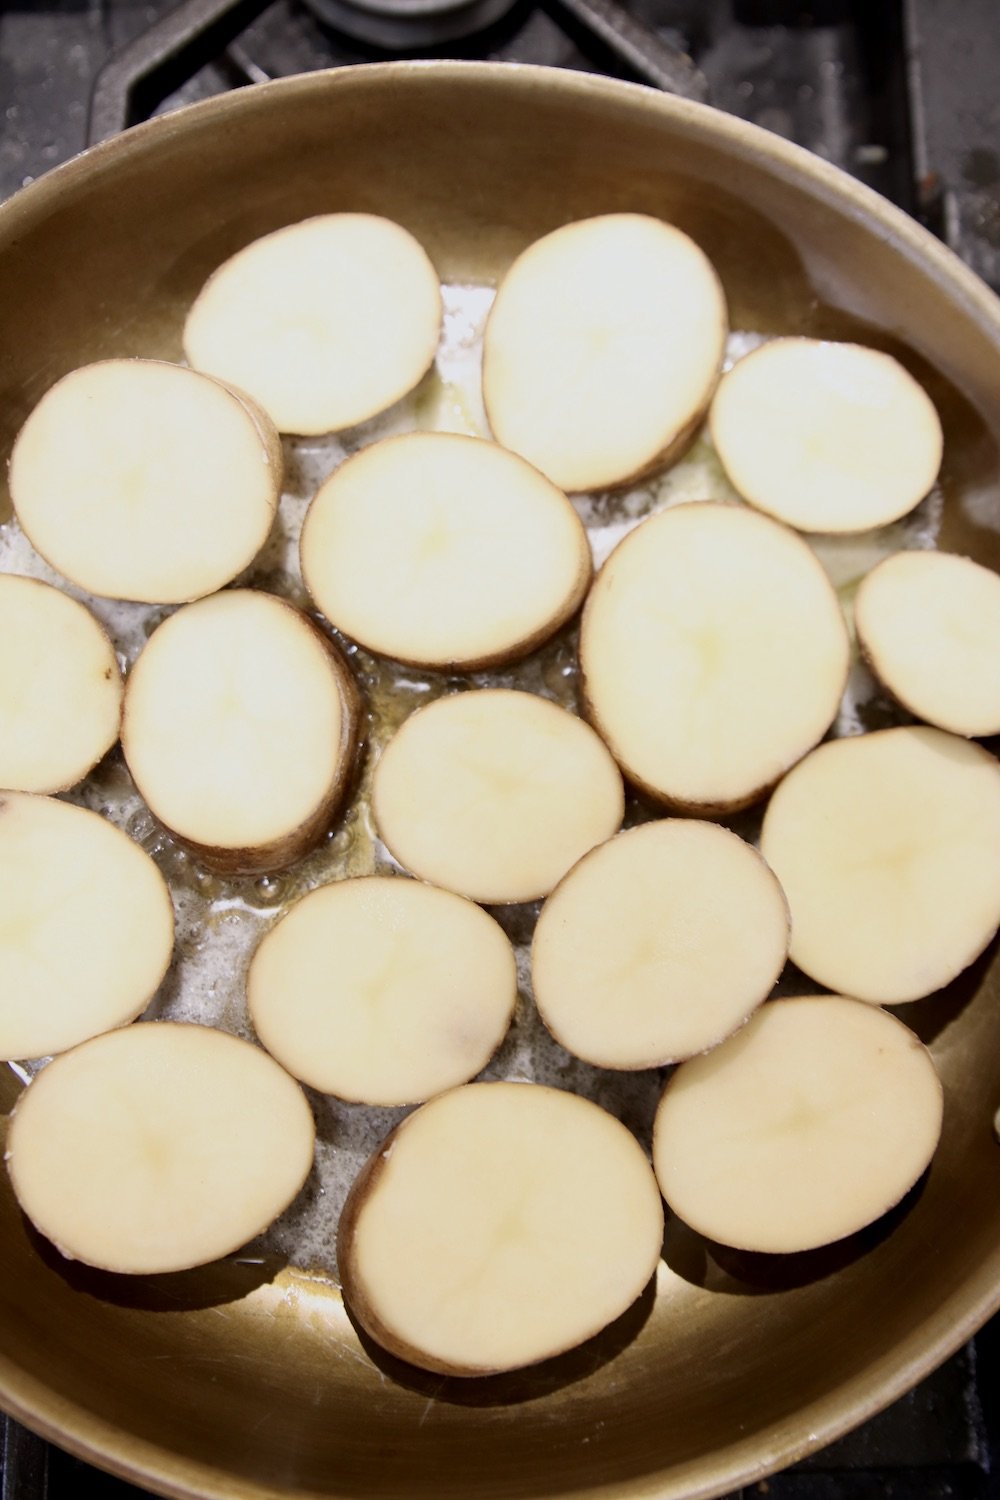 sliced potatoes in a skillet